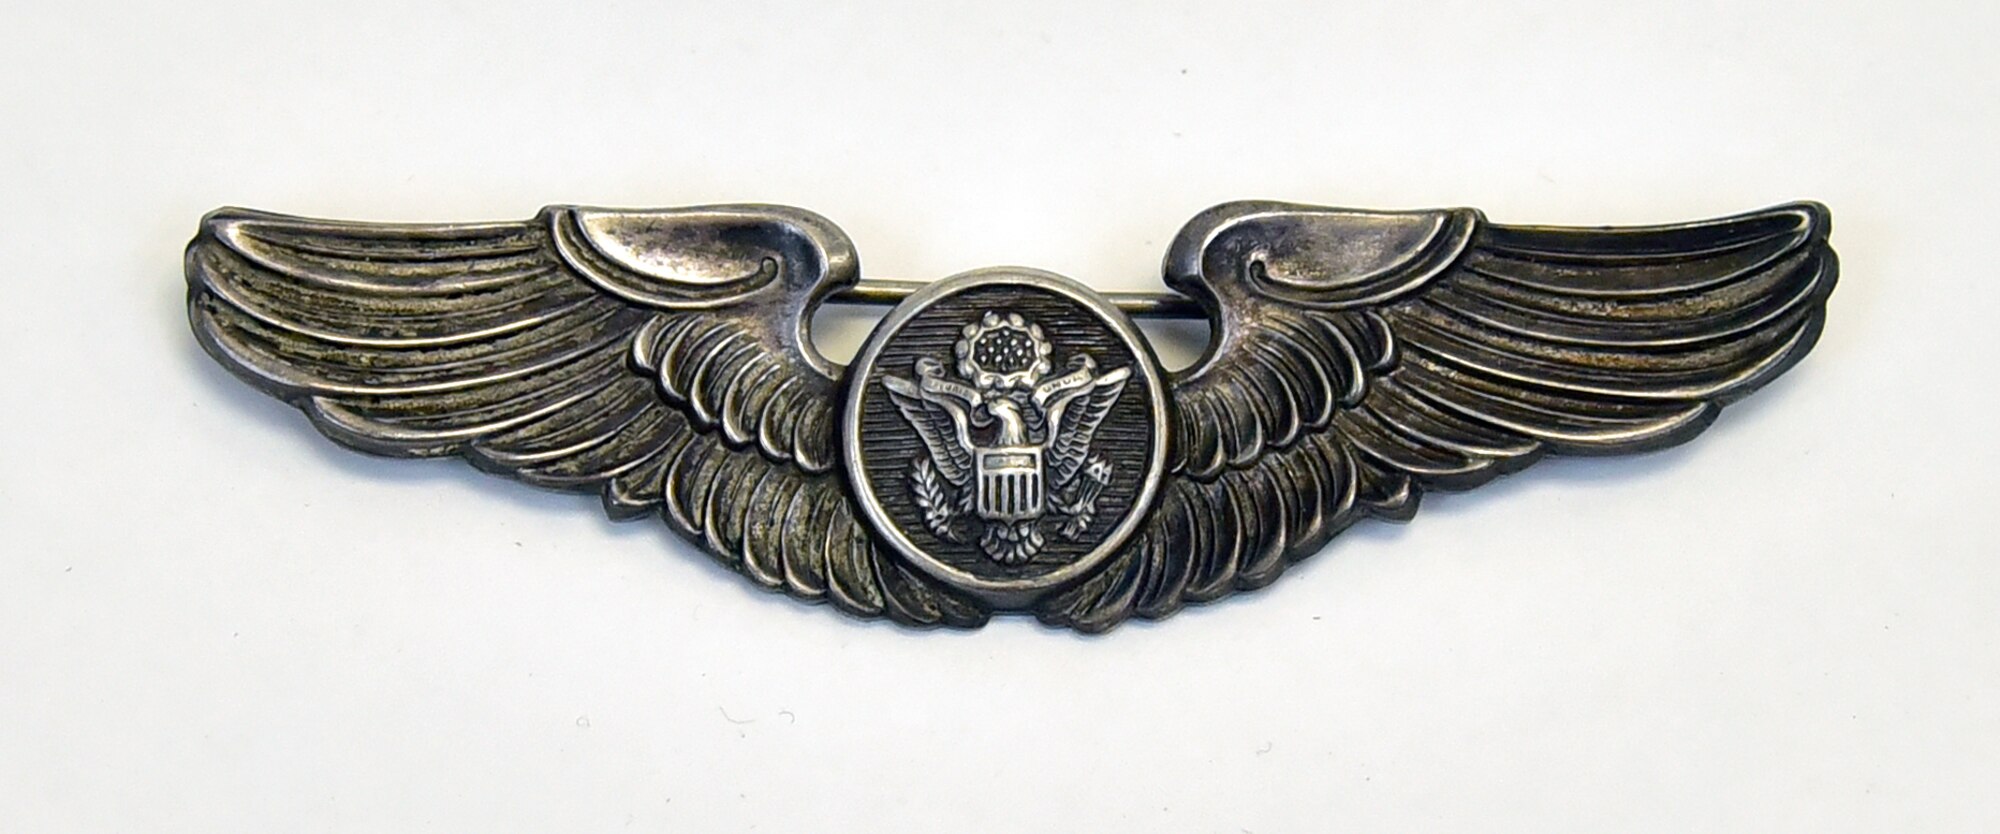 Plans call for this artifact to be displayed near the B-17F Memphis Belle™ as part of the new strategic bombardment exhibit in the WWII Gallery, which opens to the public on May 17, 2018. Memphis Belle gunner SSgt William “Bill” Winchell’s enlisted aircrew member badge.  Winchell was credited with downing an Fw 190 fighter.